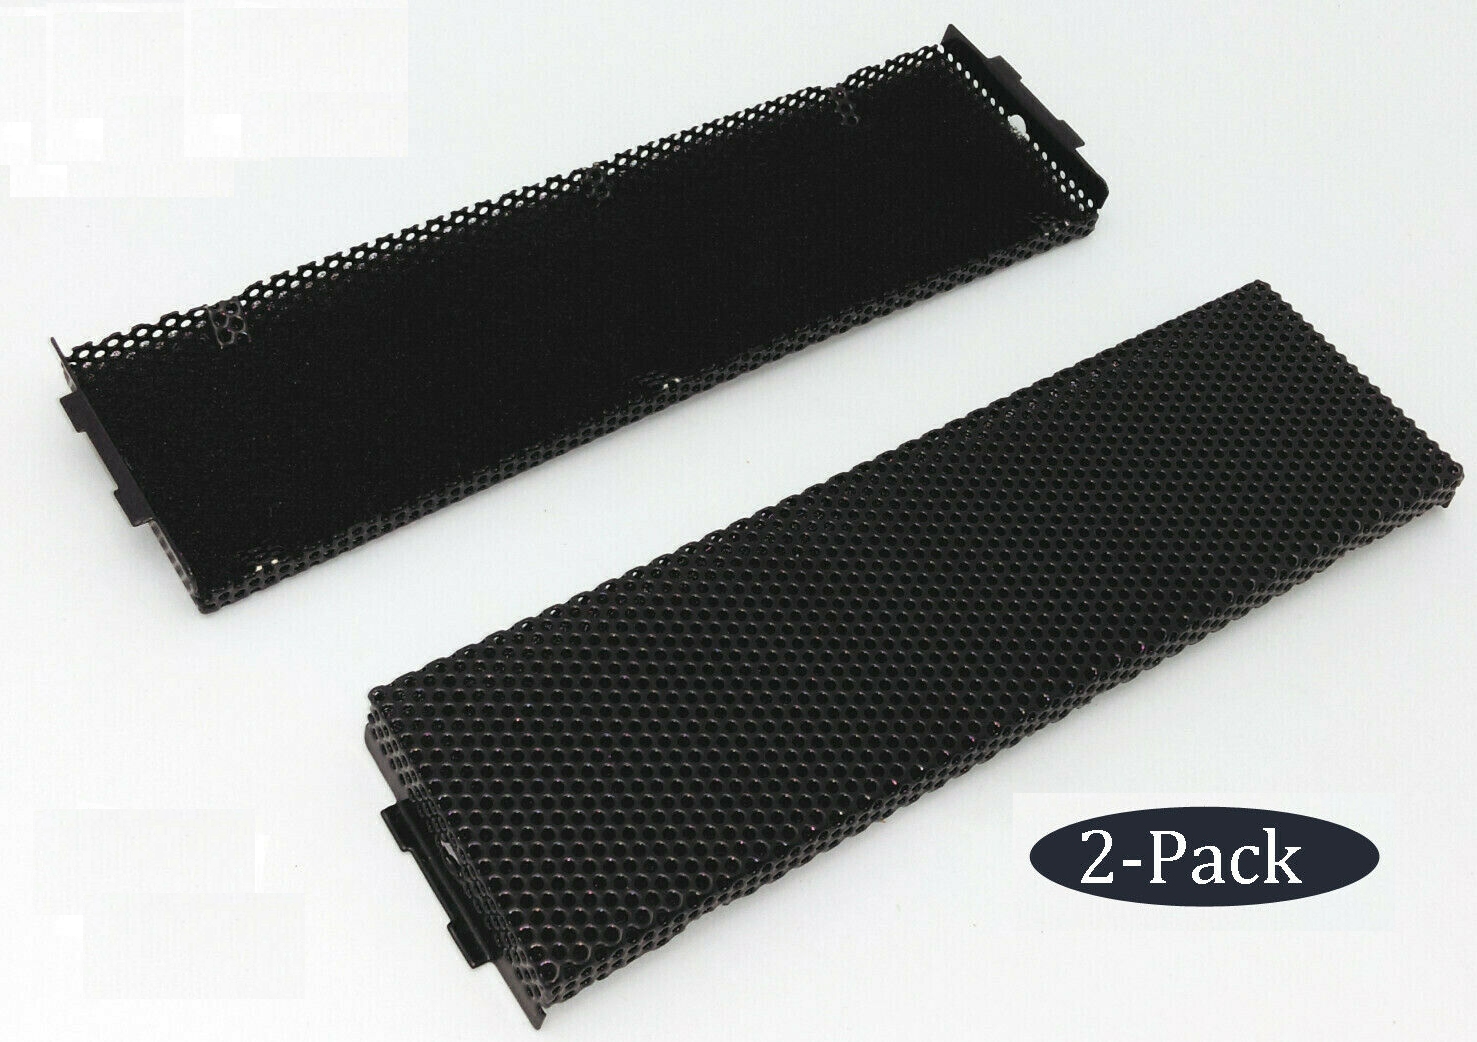 HIGH POWER Perforated Mesh Metal 5.25" Drive Bay Cover Plates